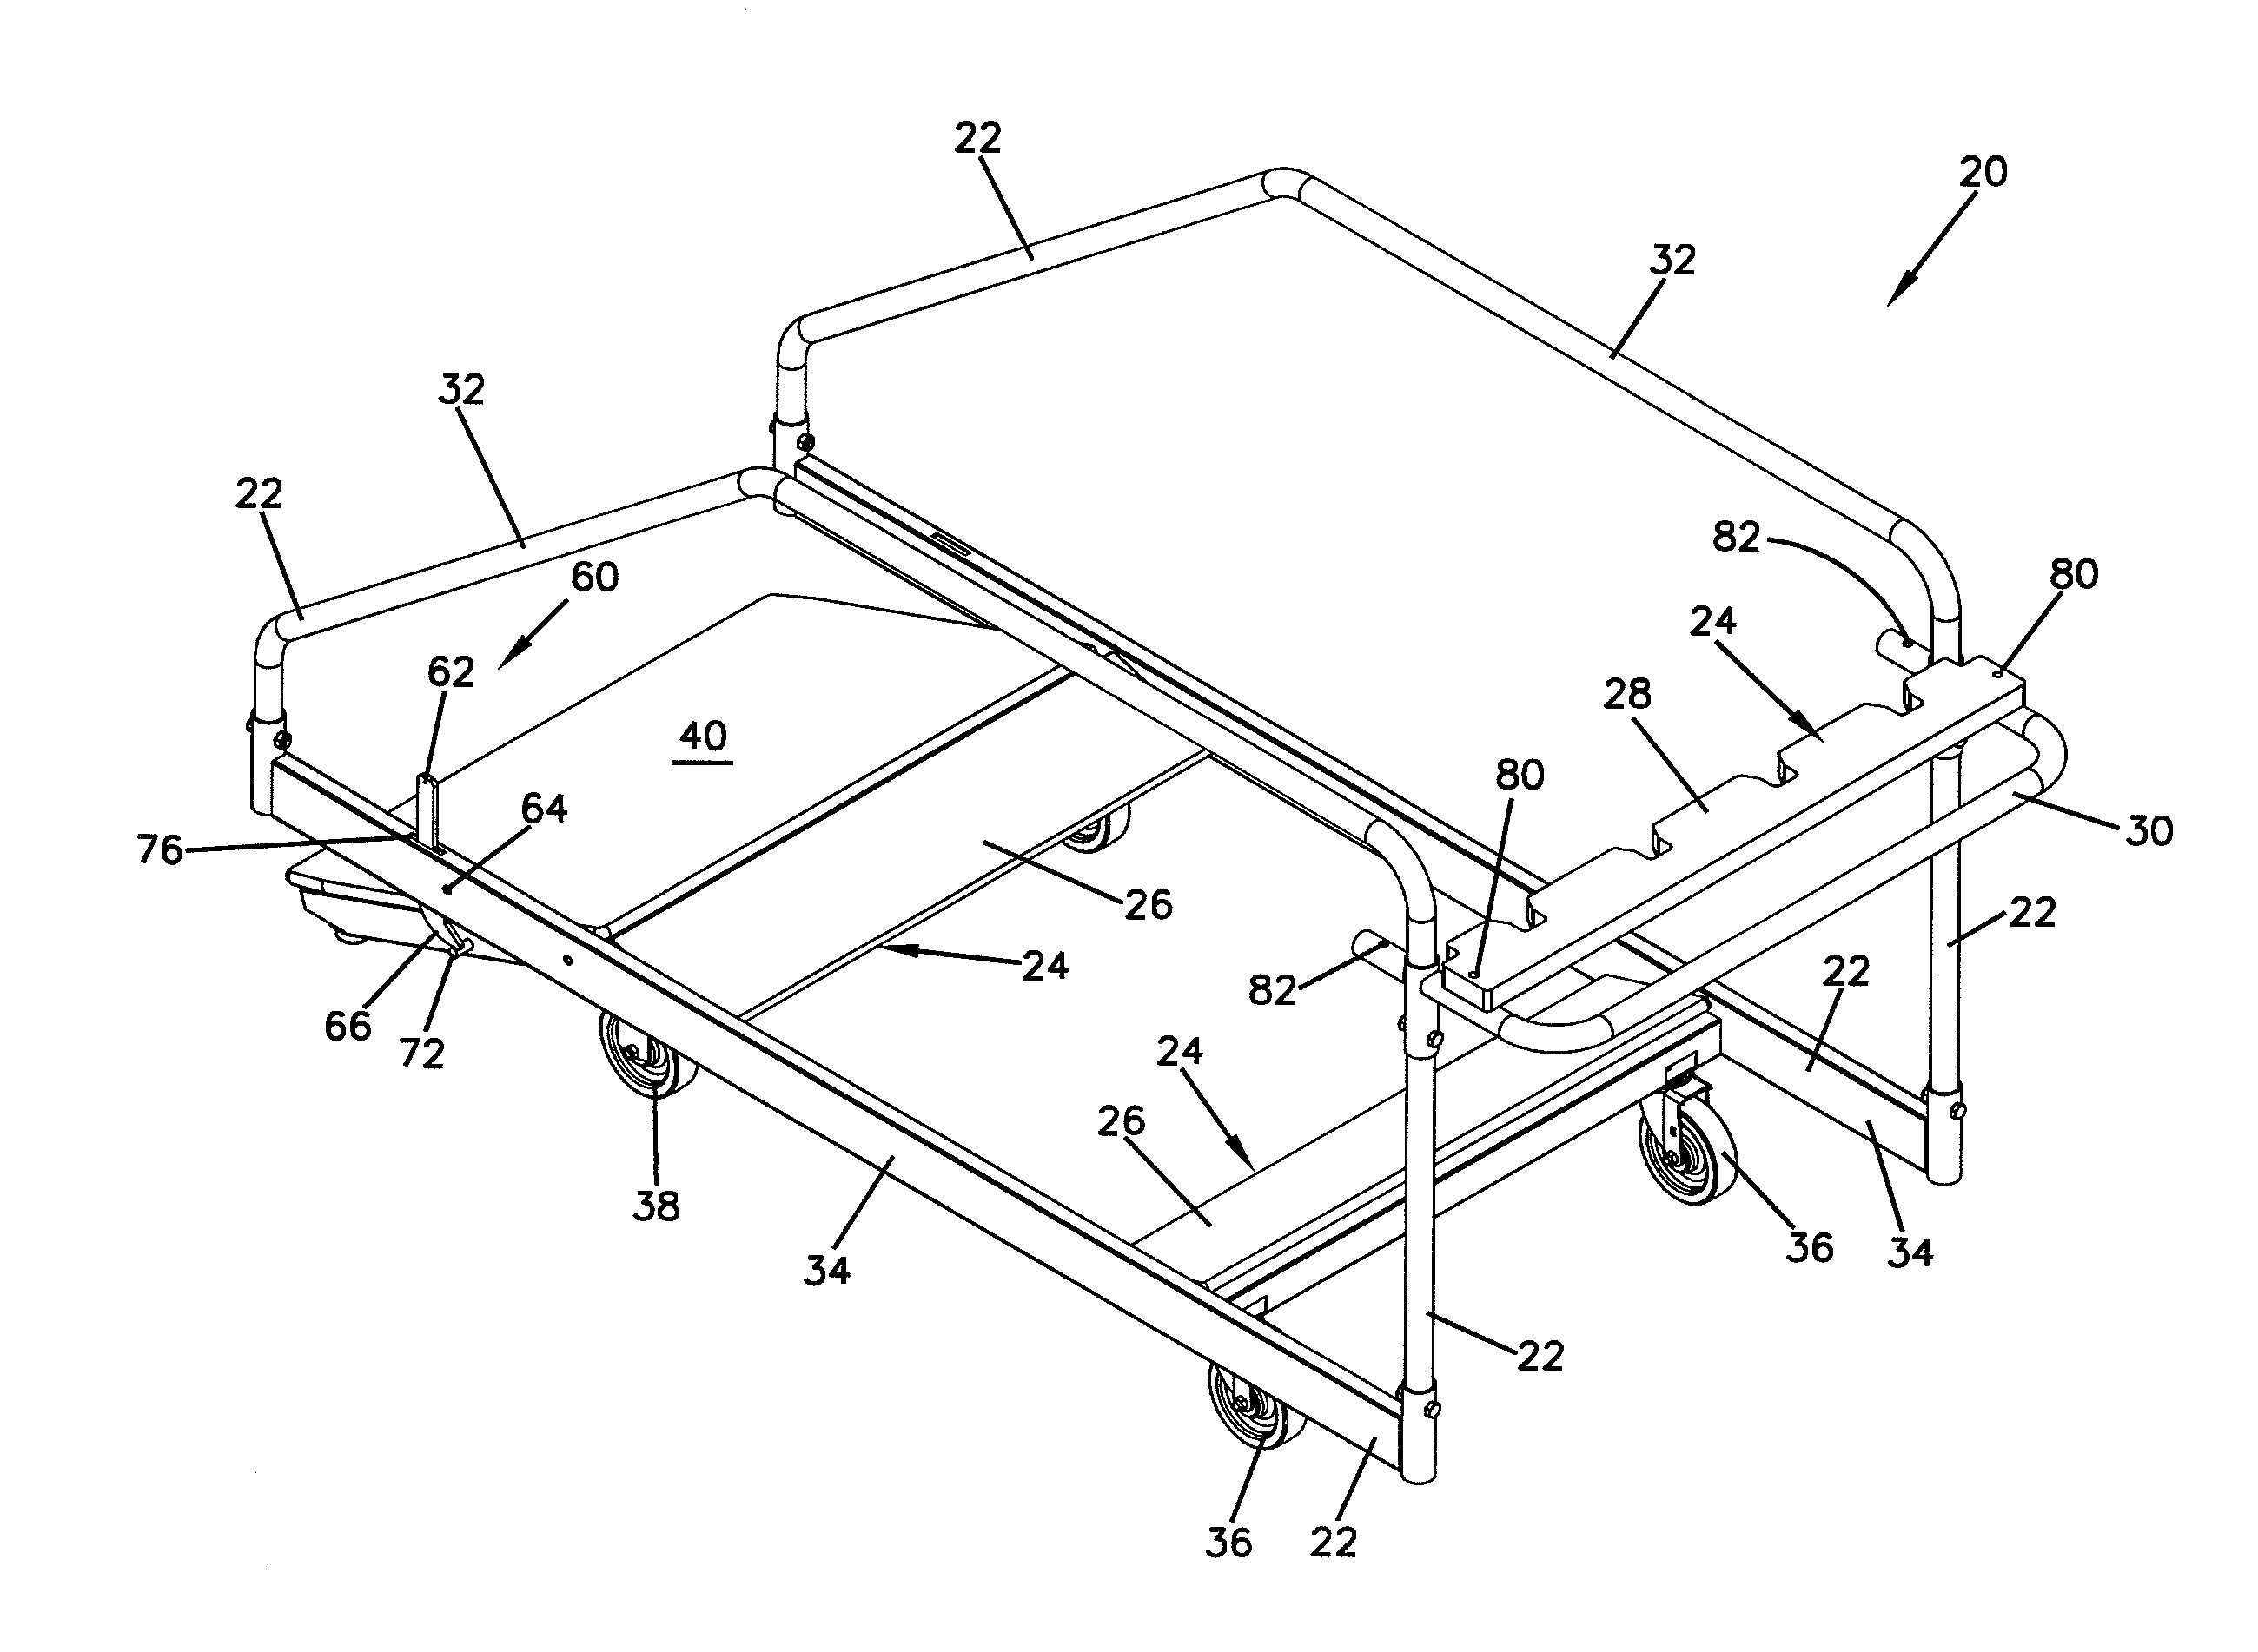 Folding table transportation and storage system